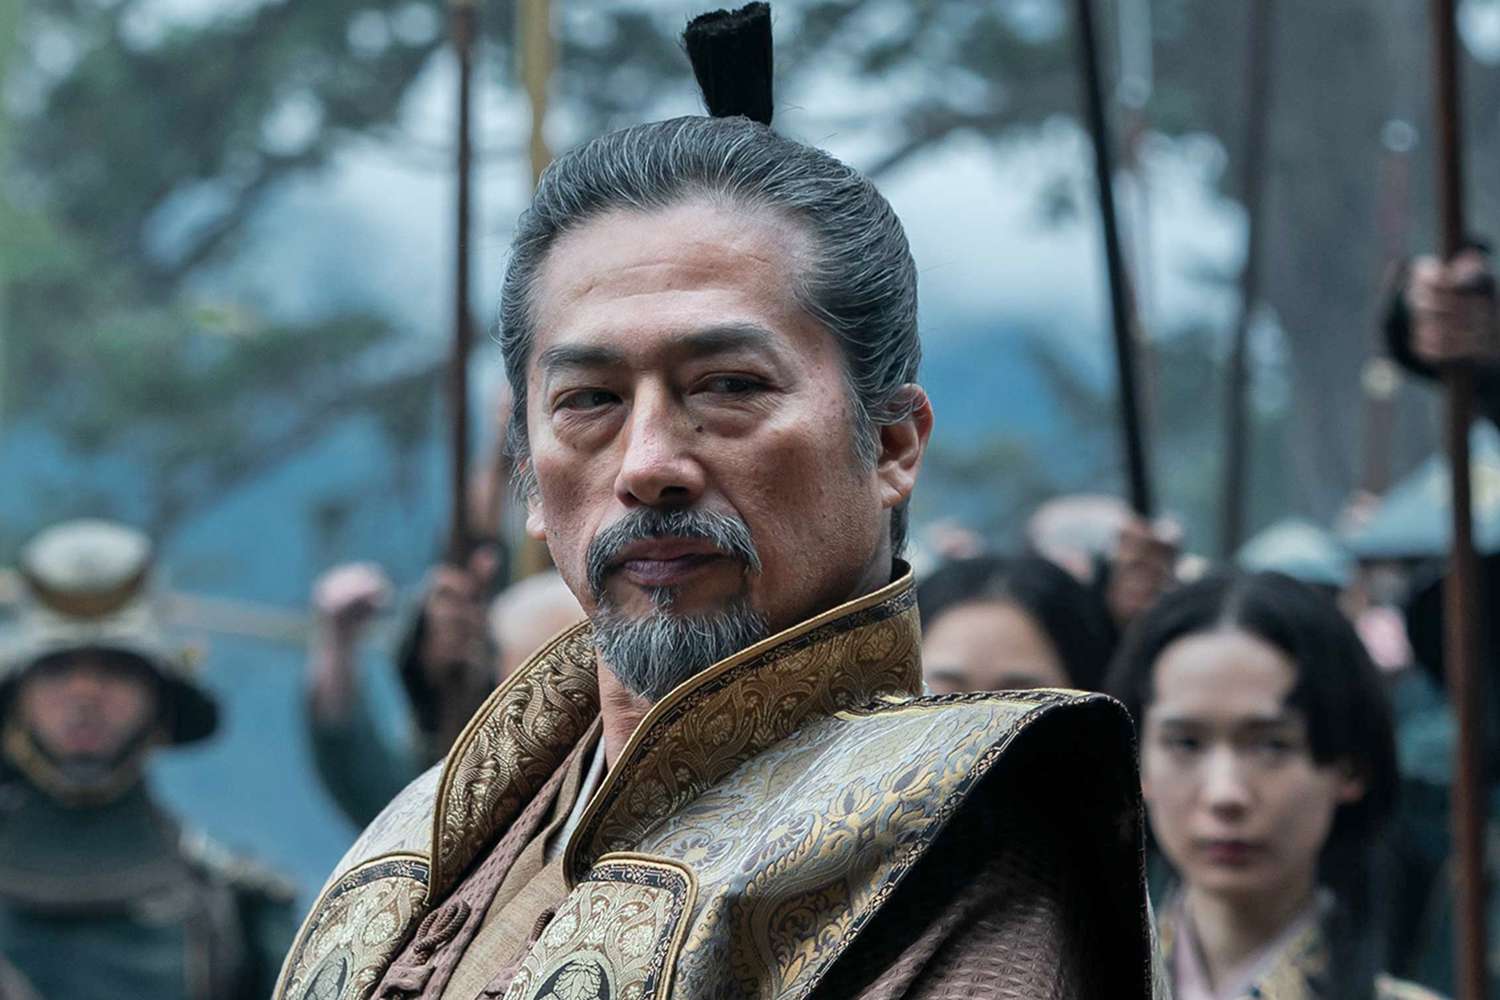 'Shōgun': What to Know About the Emmy-Nominated Samurai Drama